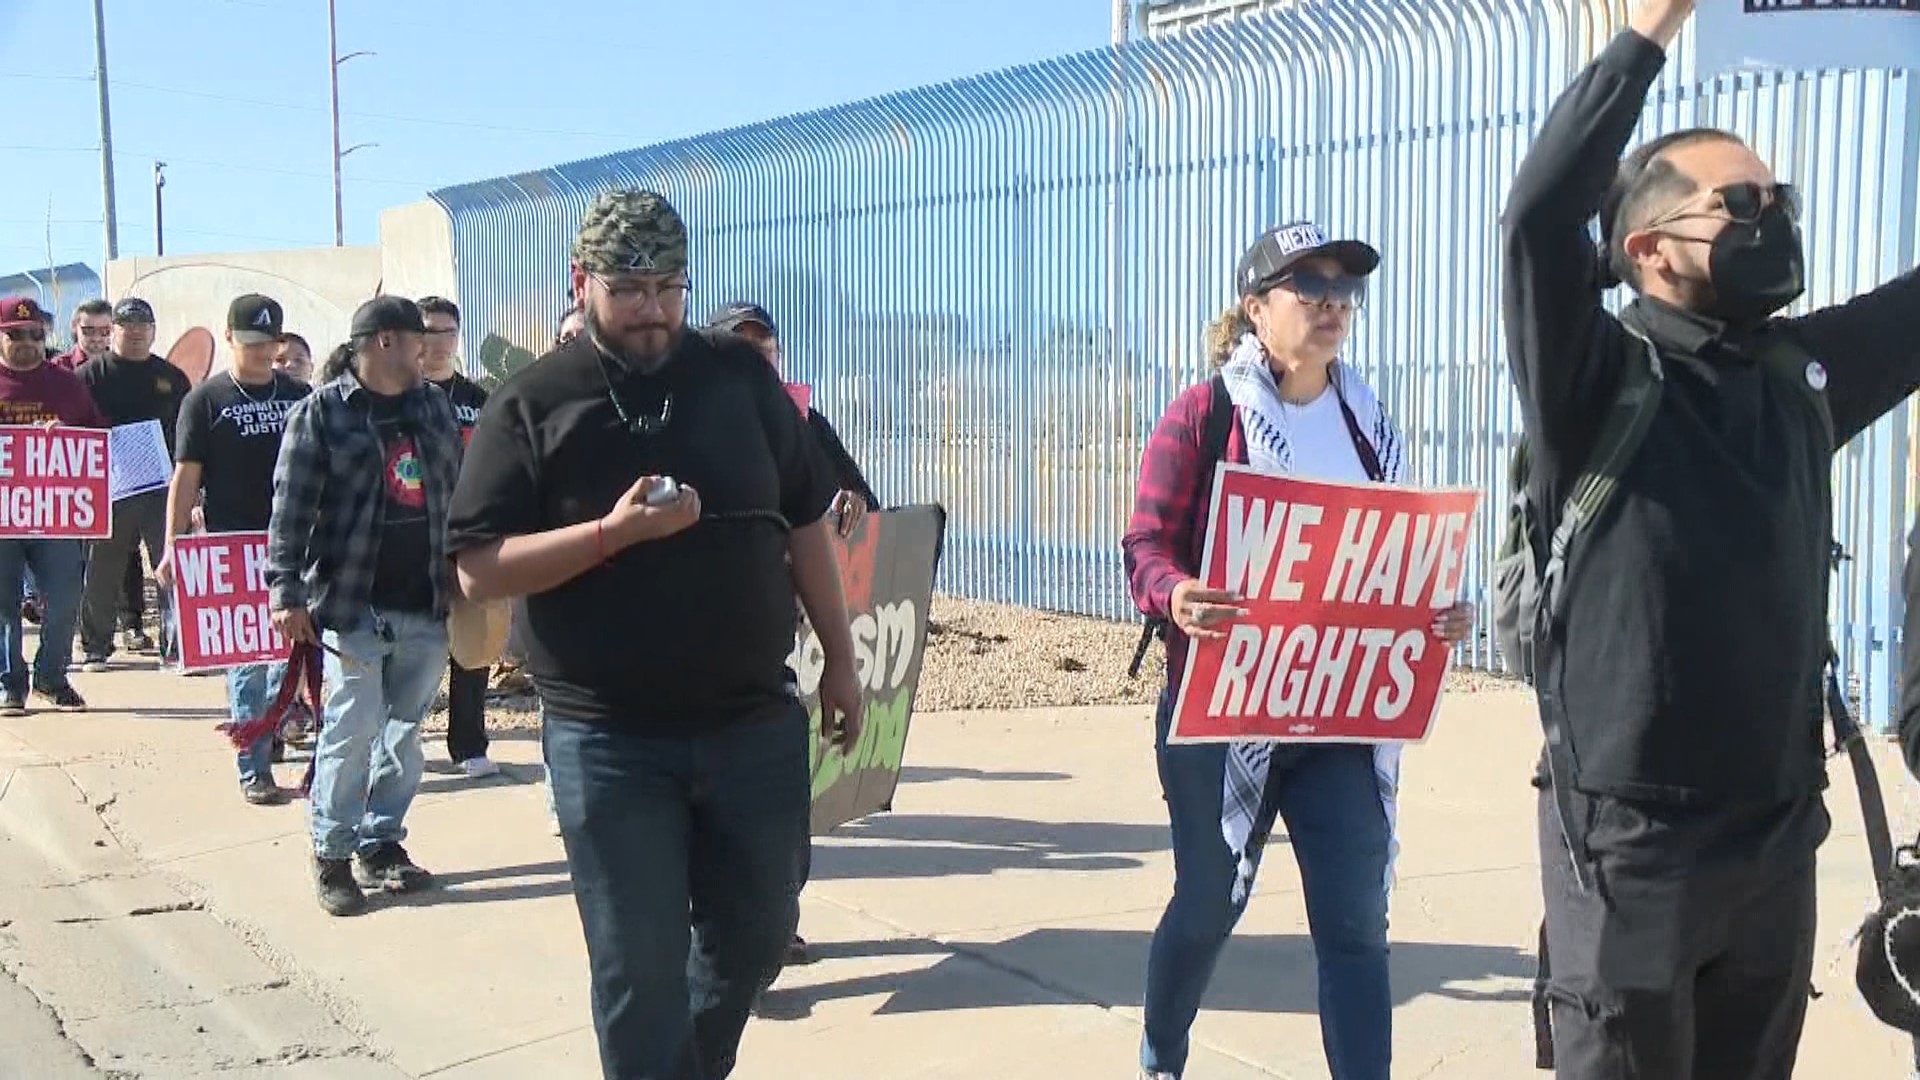 A protest over what some are calling 'anti-immigration' bills in the Arizona state legislature was held Saturday and 12News spoke with the protesters and legislators